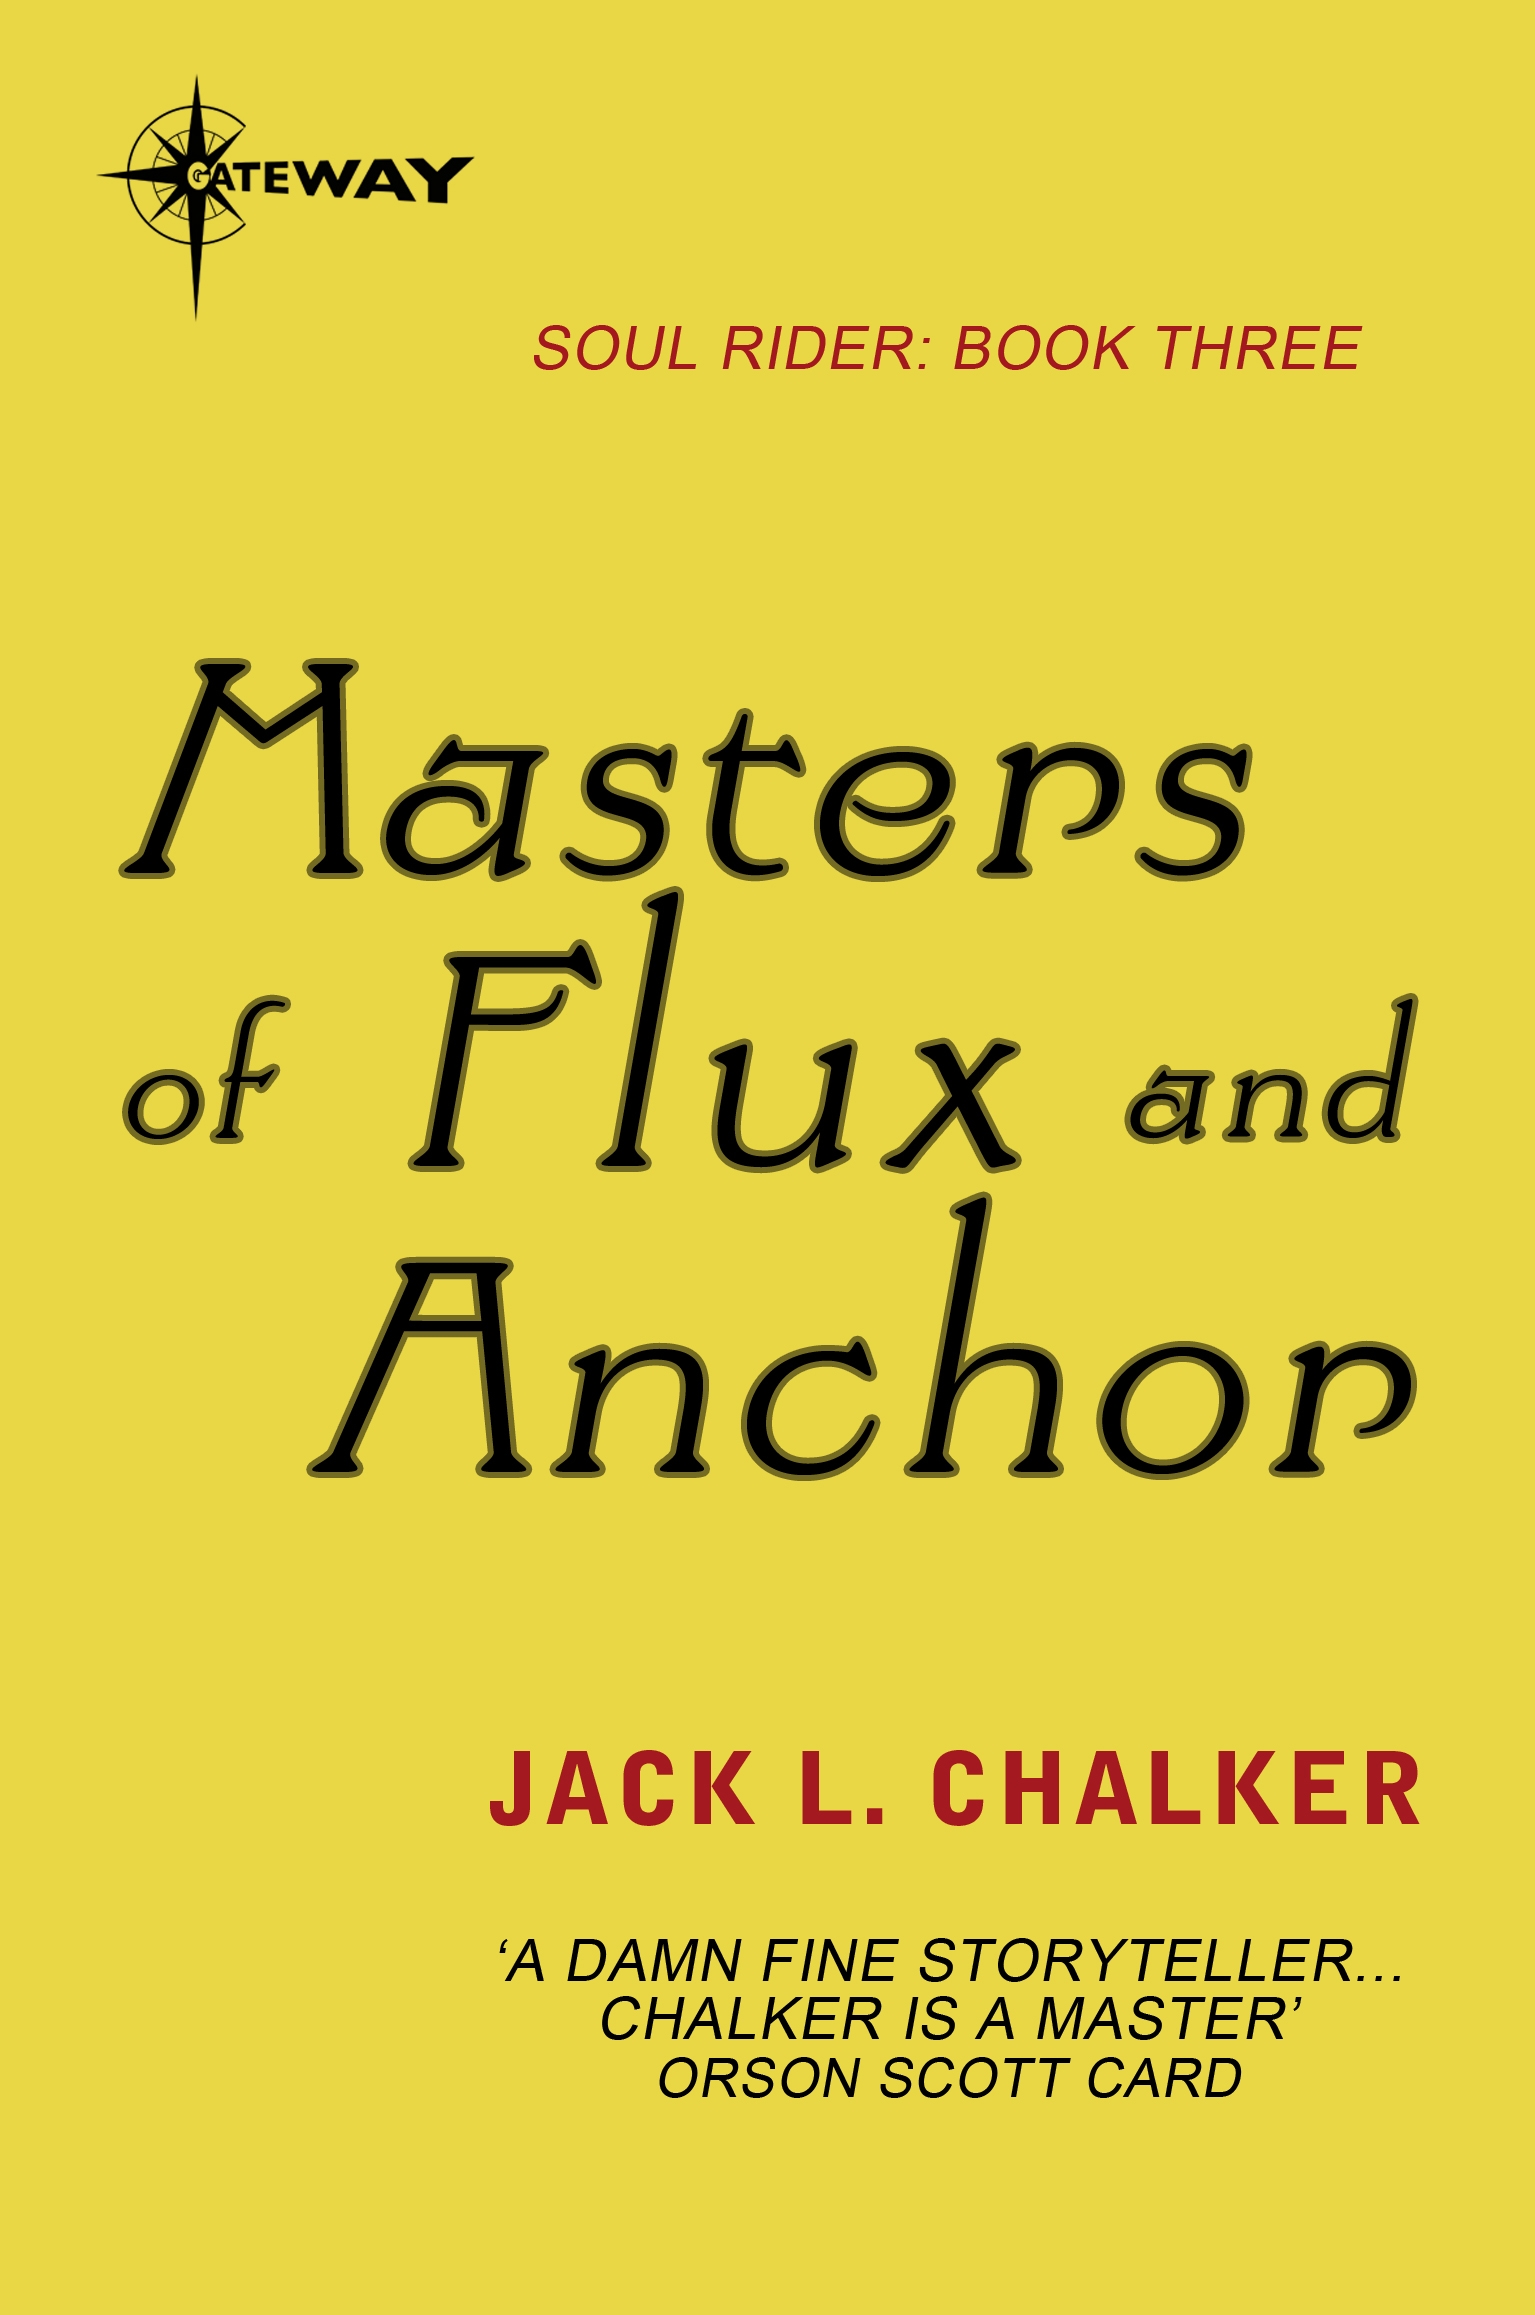 Masters of Flux and Anchor